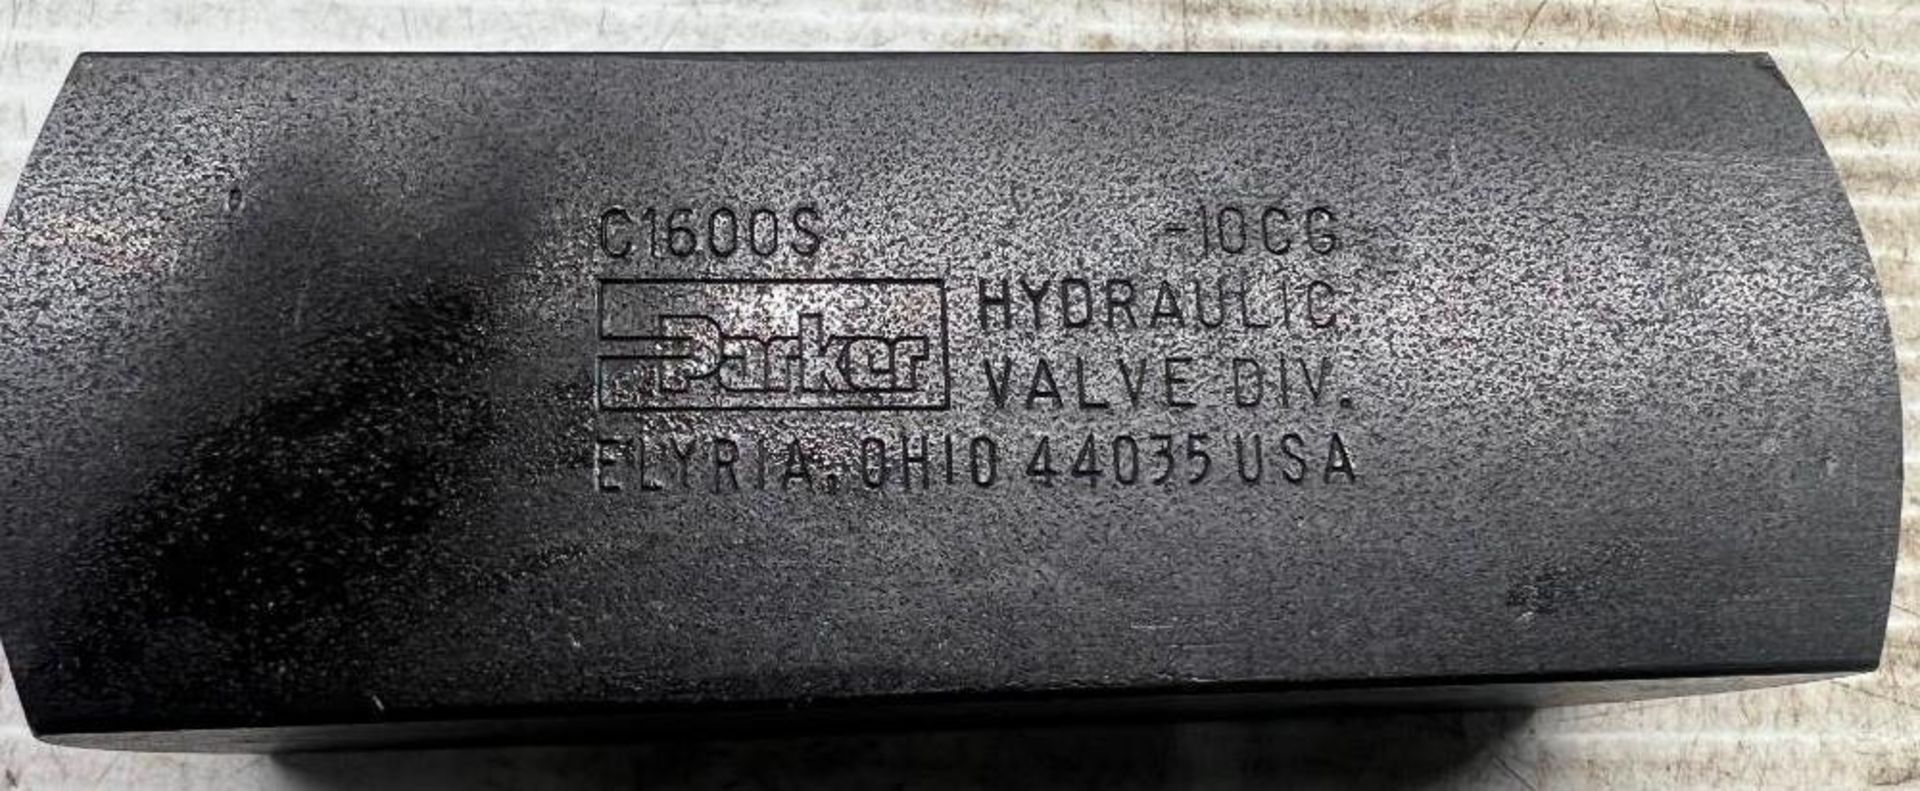 Parker # C1600S Hydraulic Check Valve - Image 4 of 4